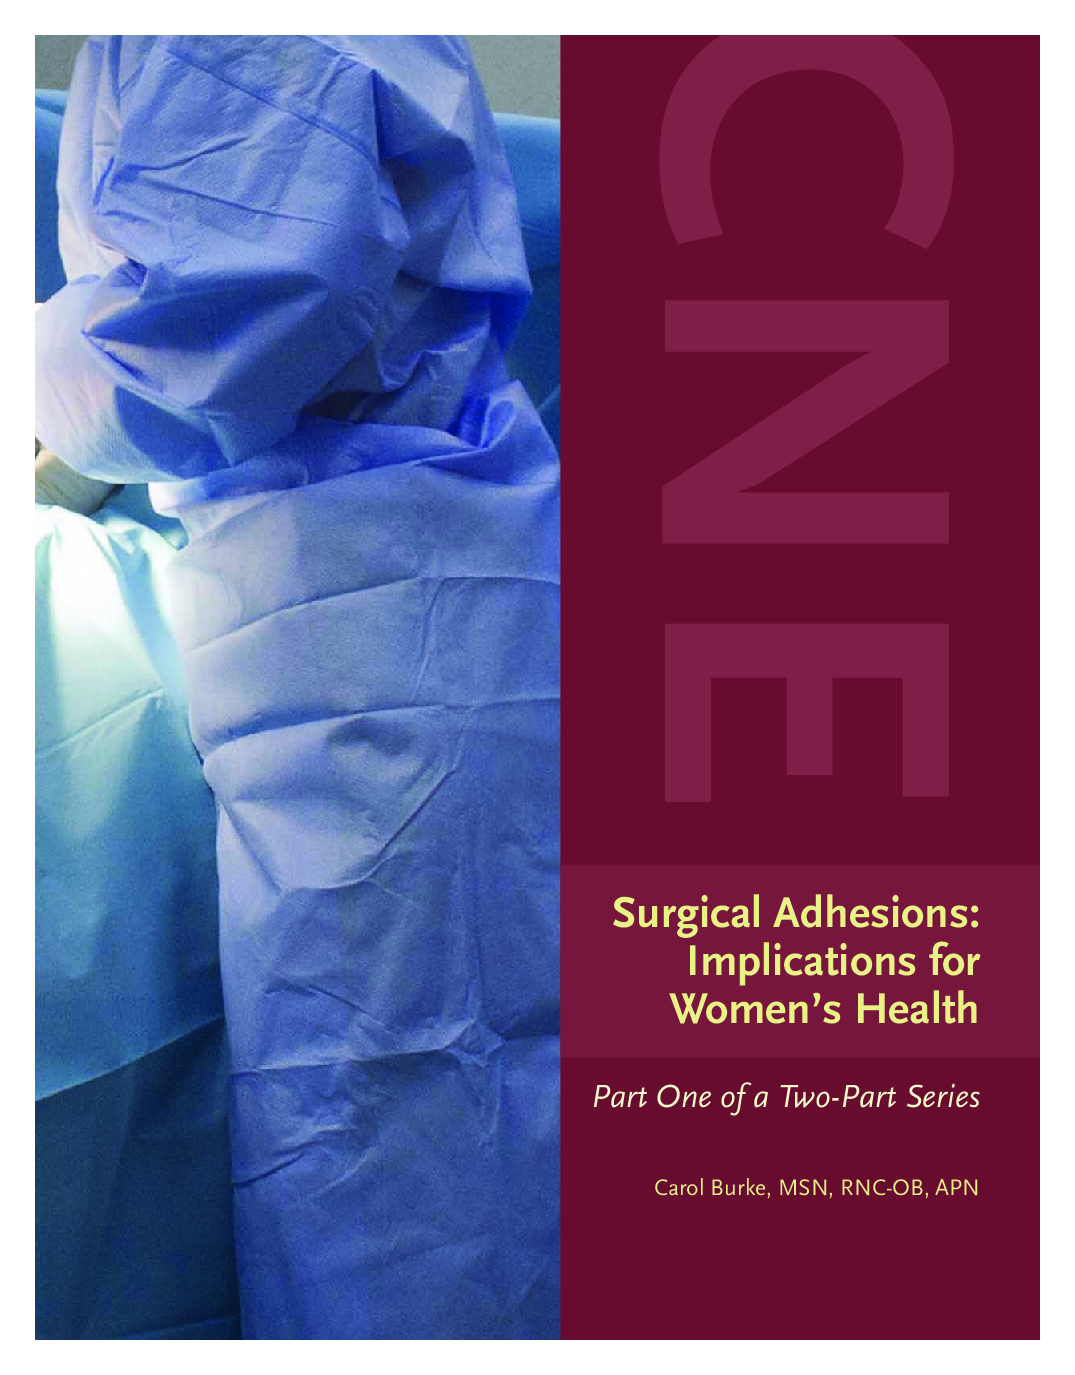 Surgical Adhesions: Implications for Women's Health: Part One of a Two-Part Series